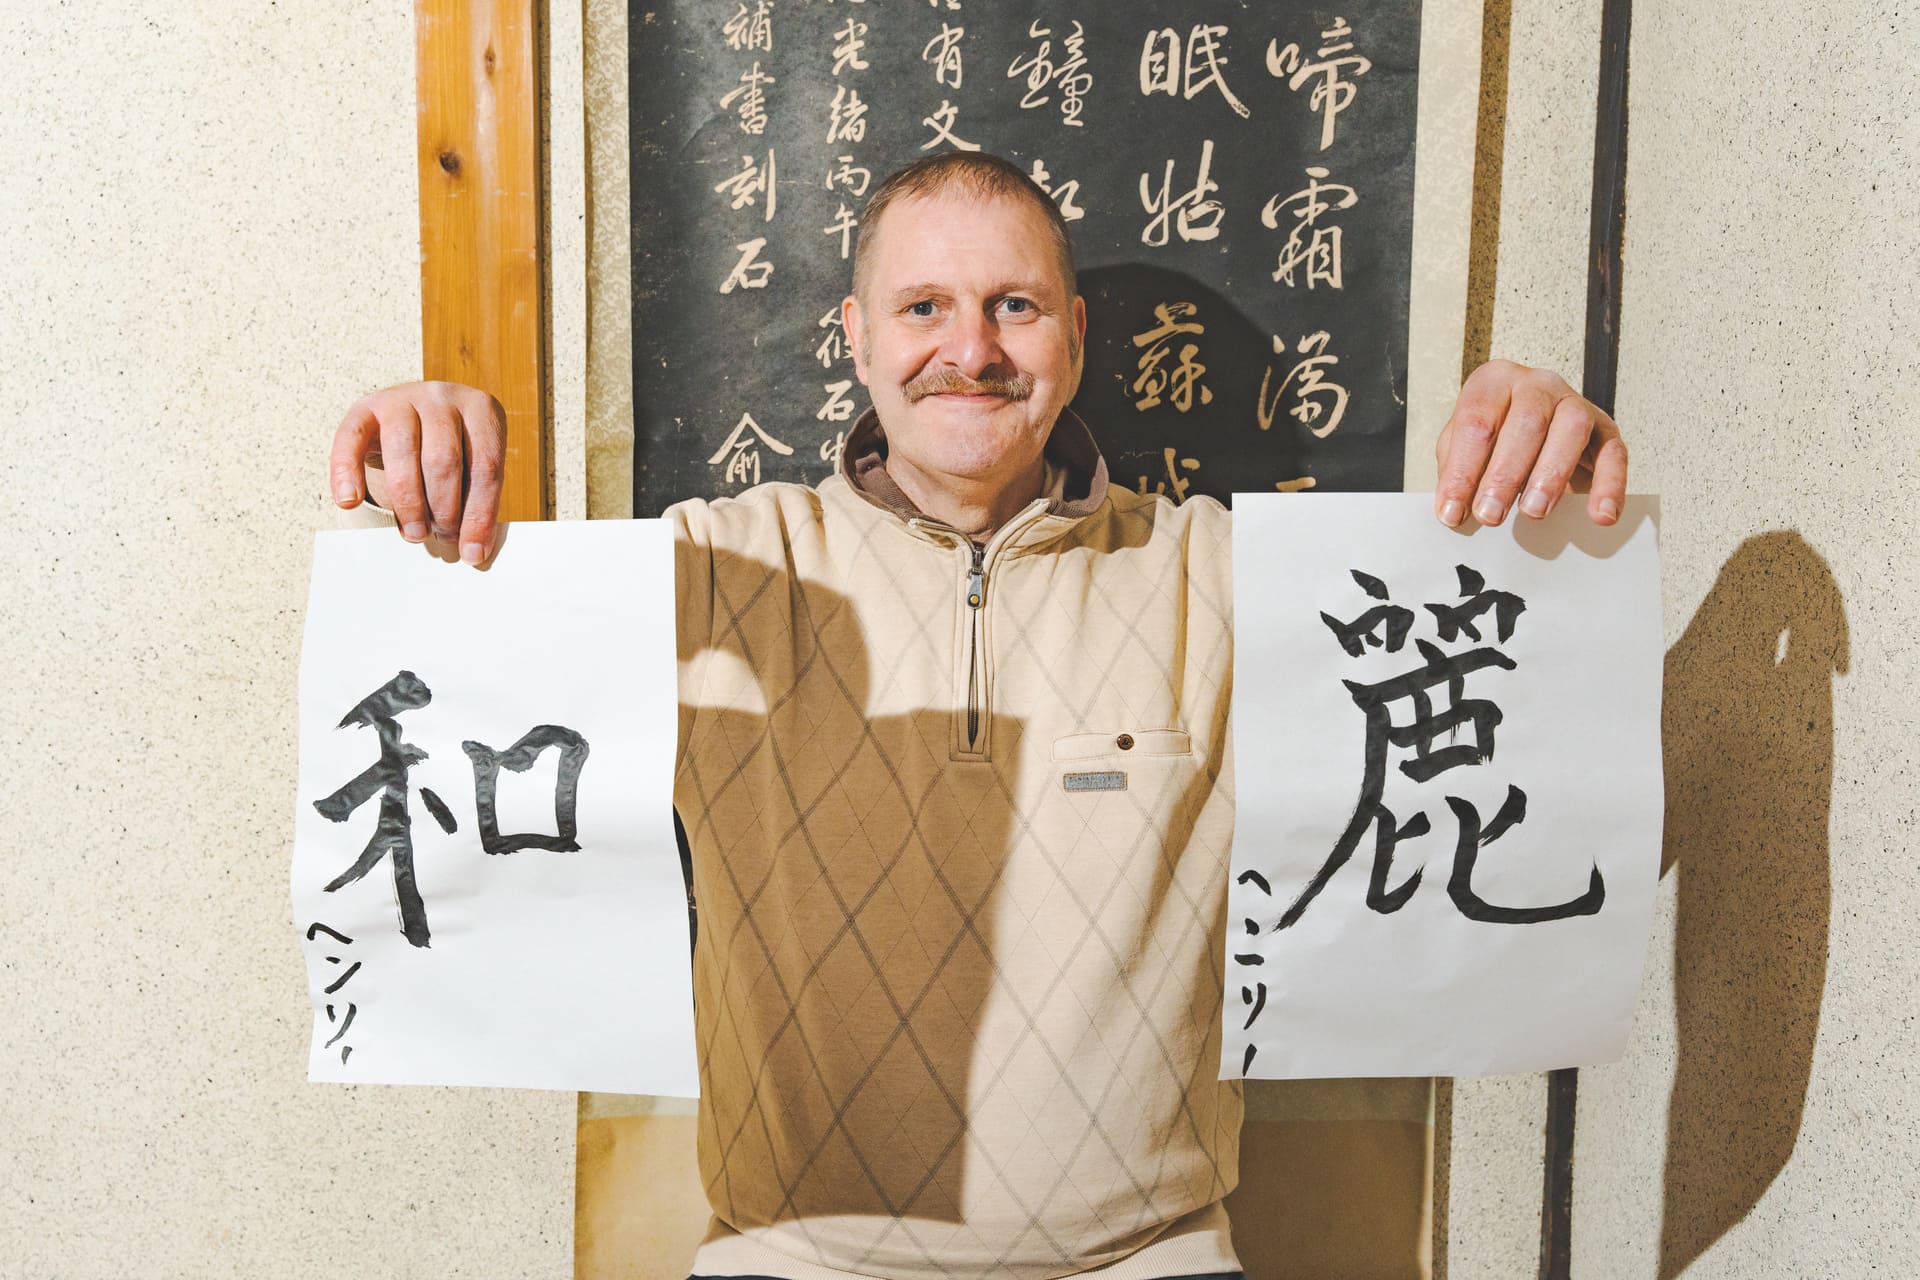 Japanese Cultural Experiences at Kyoto Abeya. A smiling man holding two pieces of calligraphy artwork, with the characters '和' and '愛' written on them, standing in front of a wall with Japanese writing.